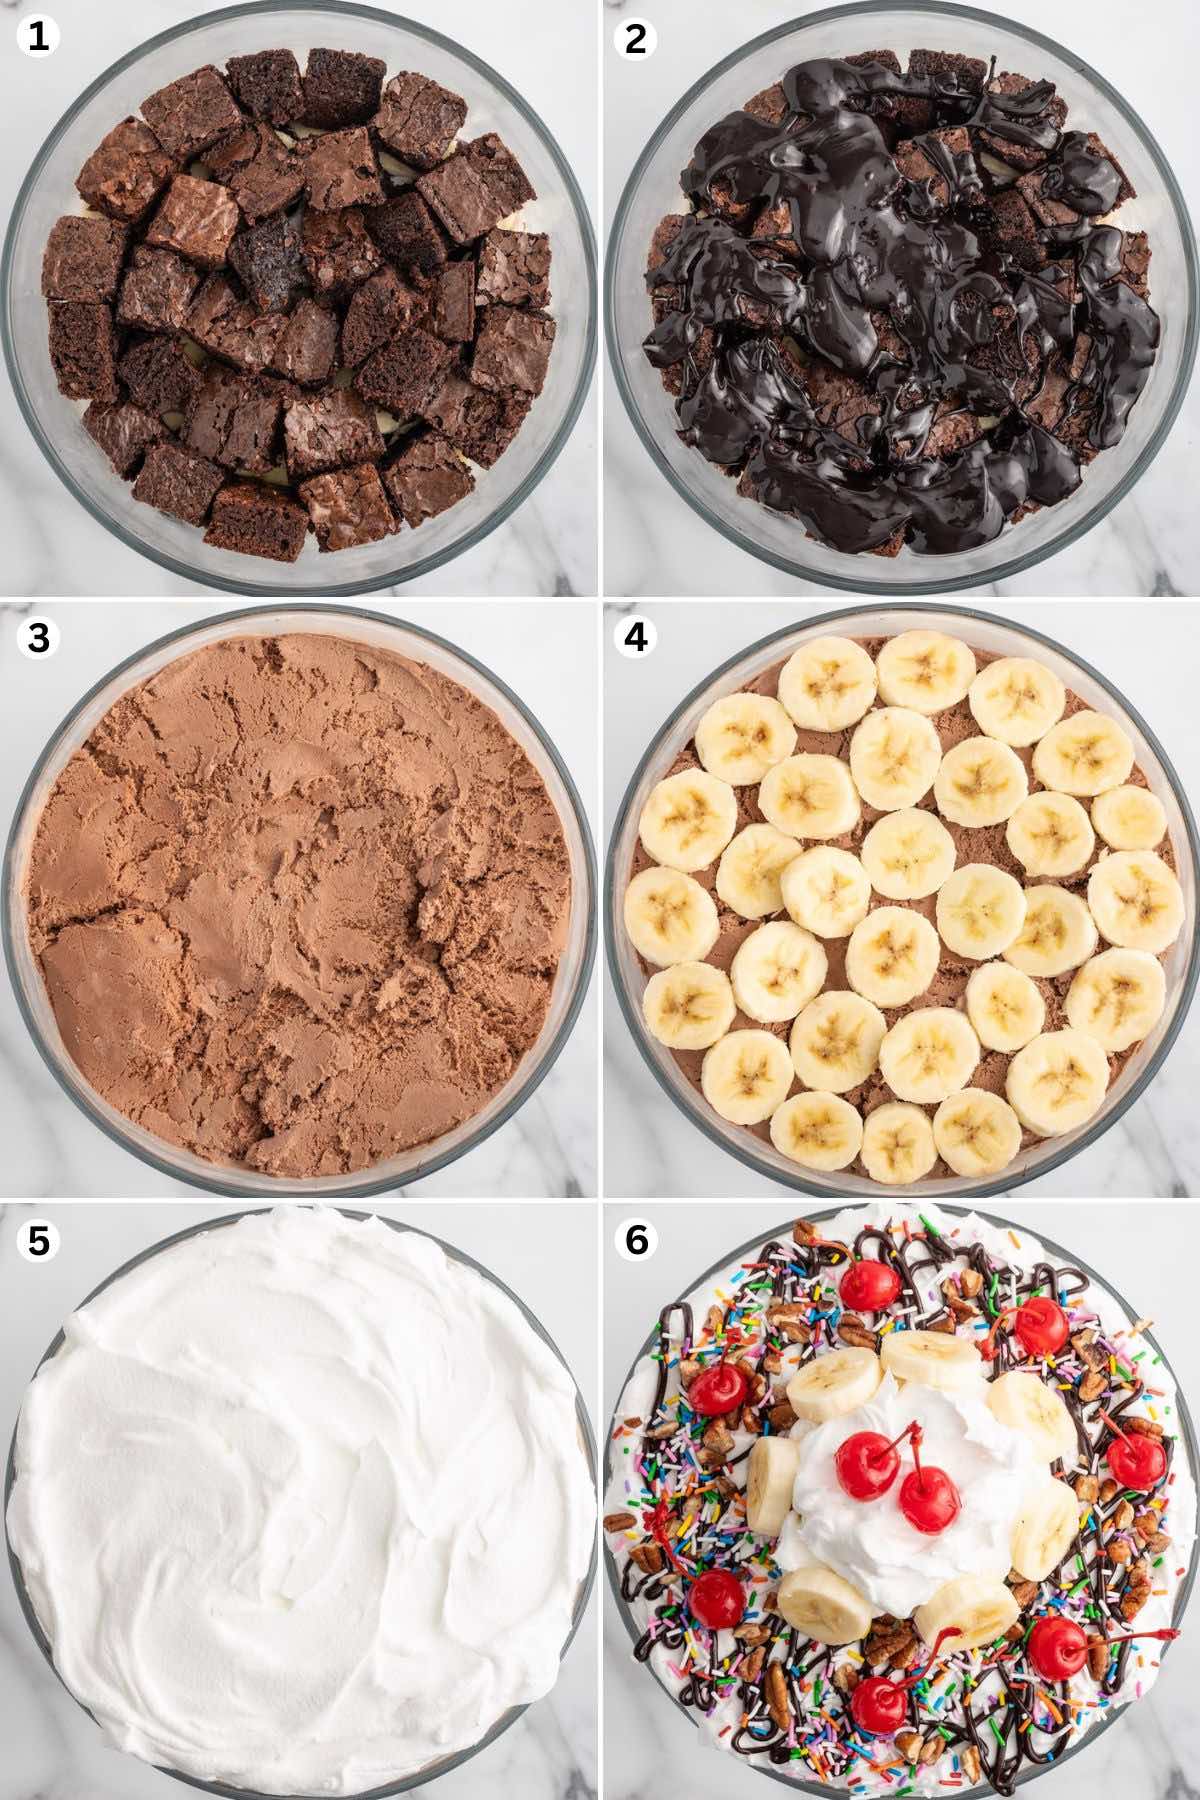 Assemble the brownie cubes at the bottom of a trifle dish. Drizzle the hot fudge. Add the chocolate ice cream. Add the sliced banana. Spread the whipped topping. Drizzle chocolate sauce then add the remaining banana and cherries.